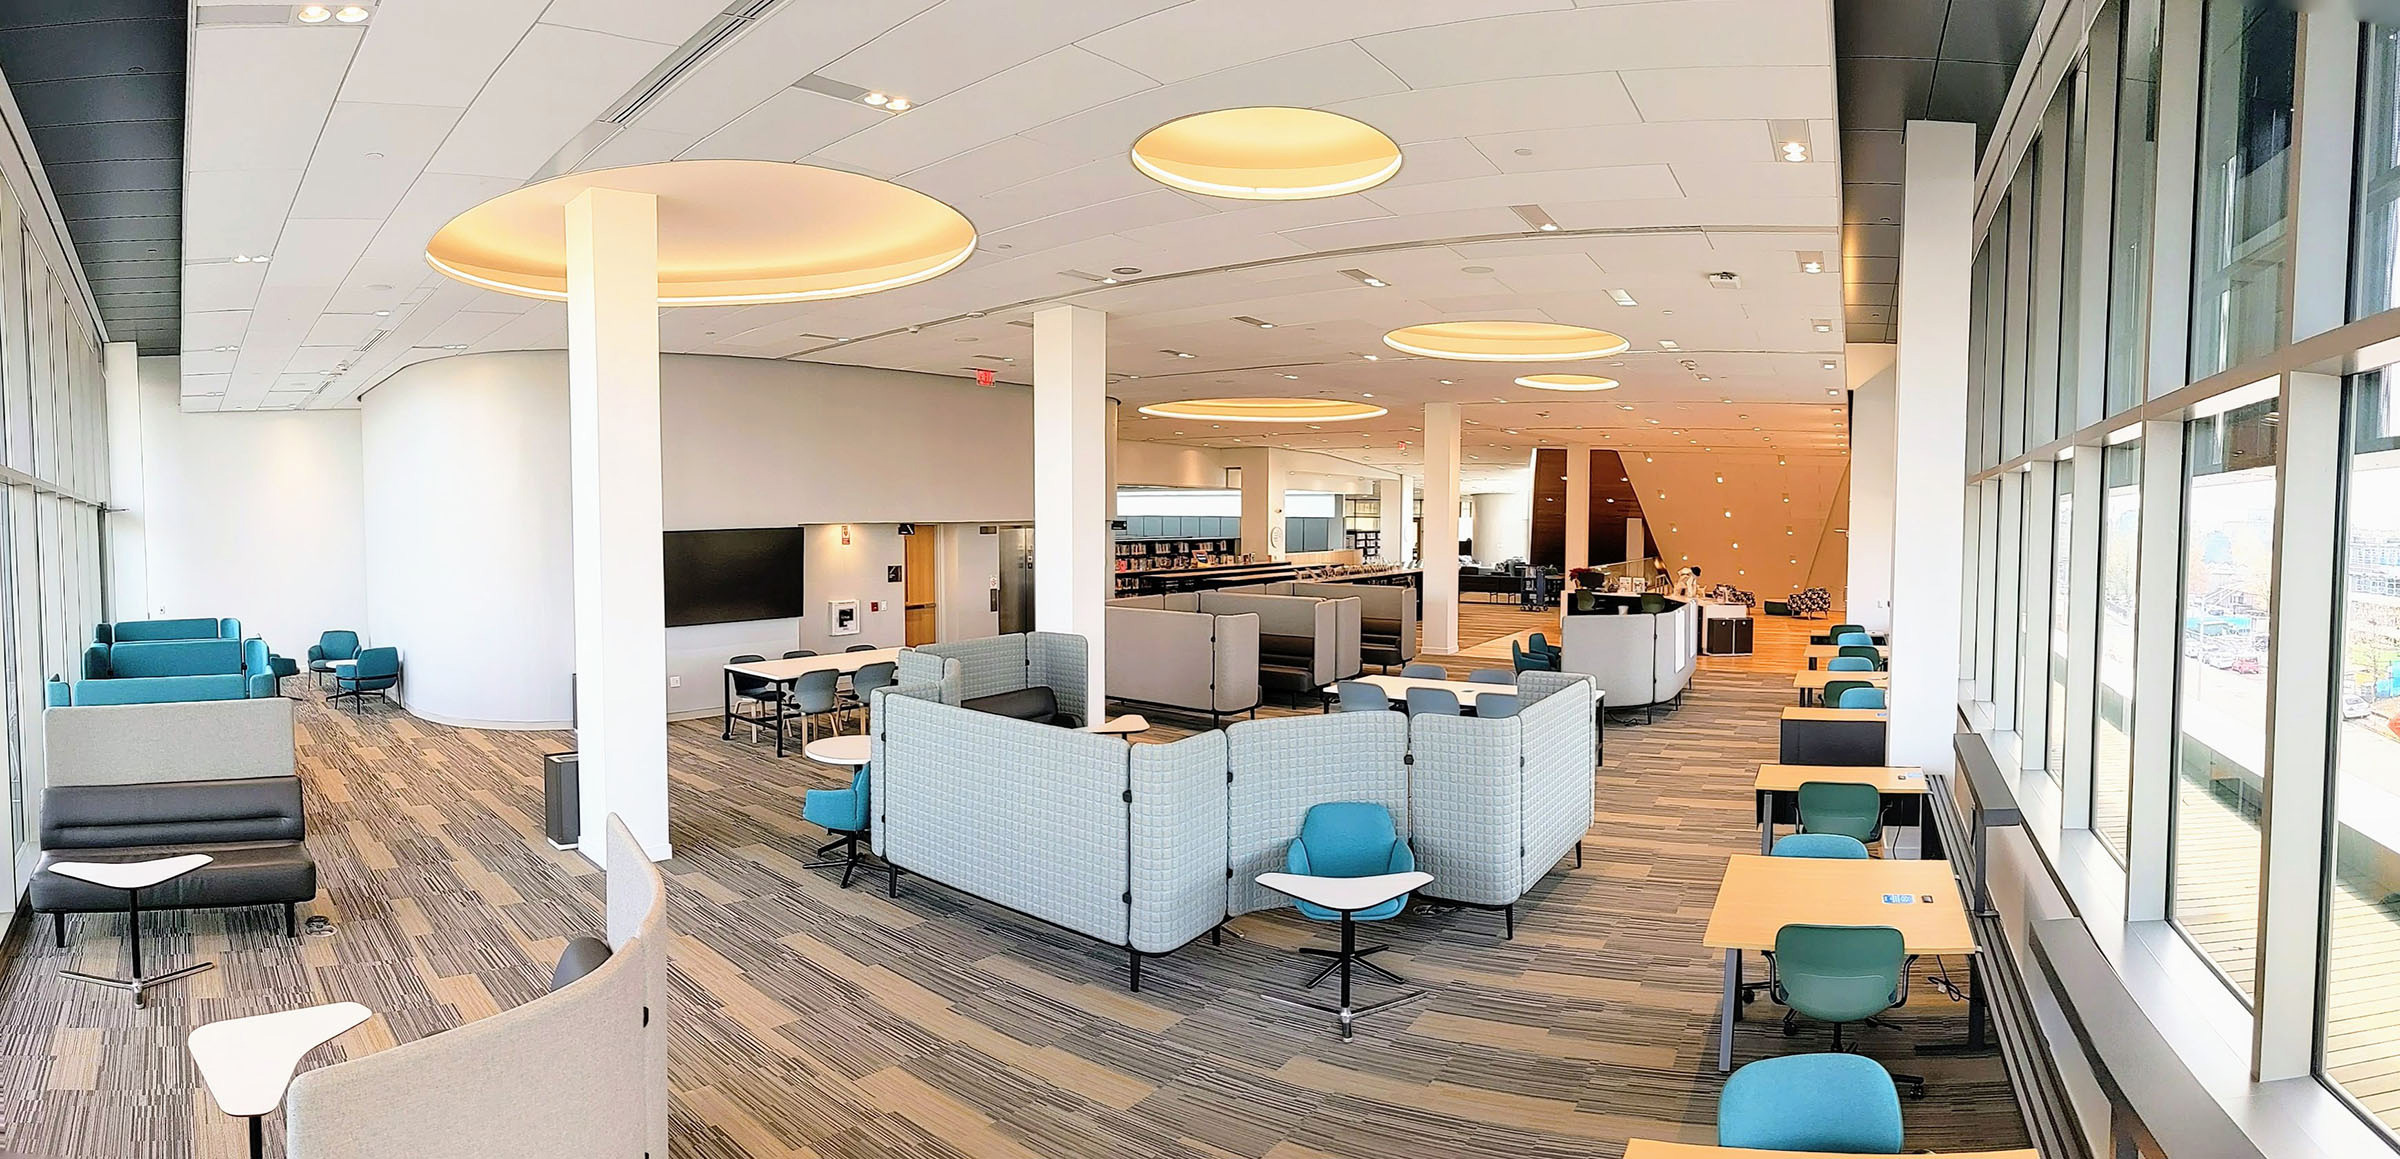 Panoramic view of the Incubator at Main Library - a large space full of seating, stretching from the wall of windows to the main staircase